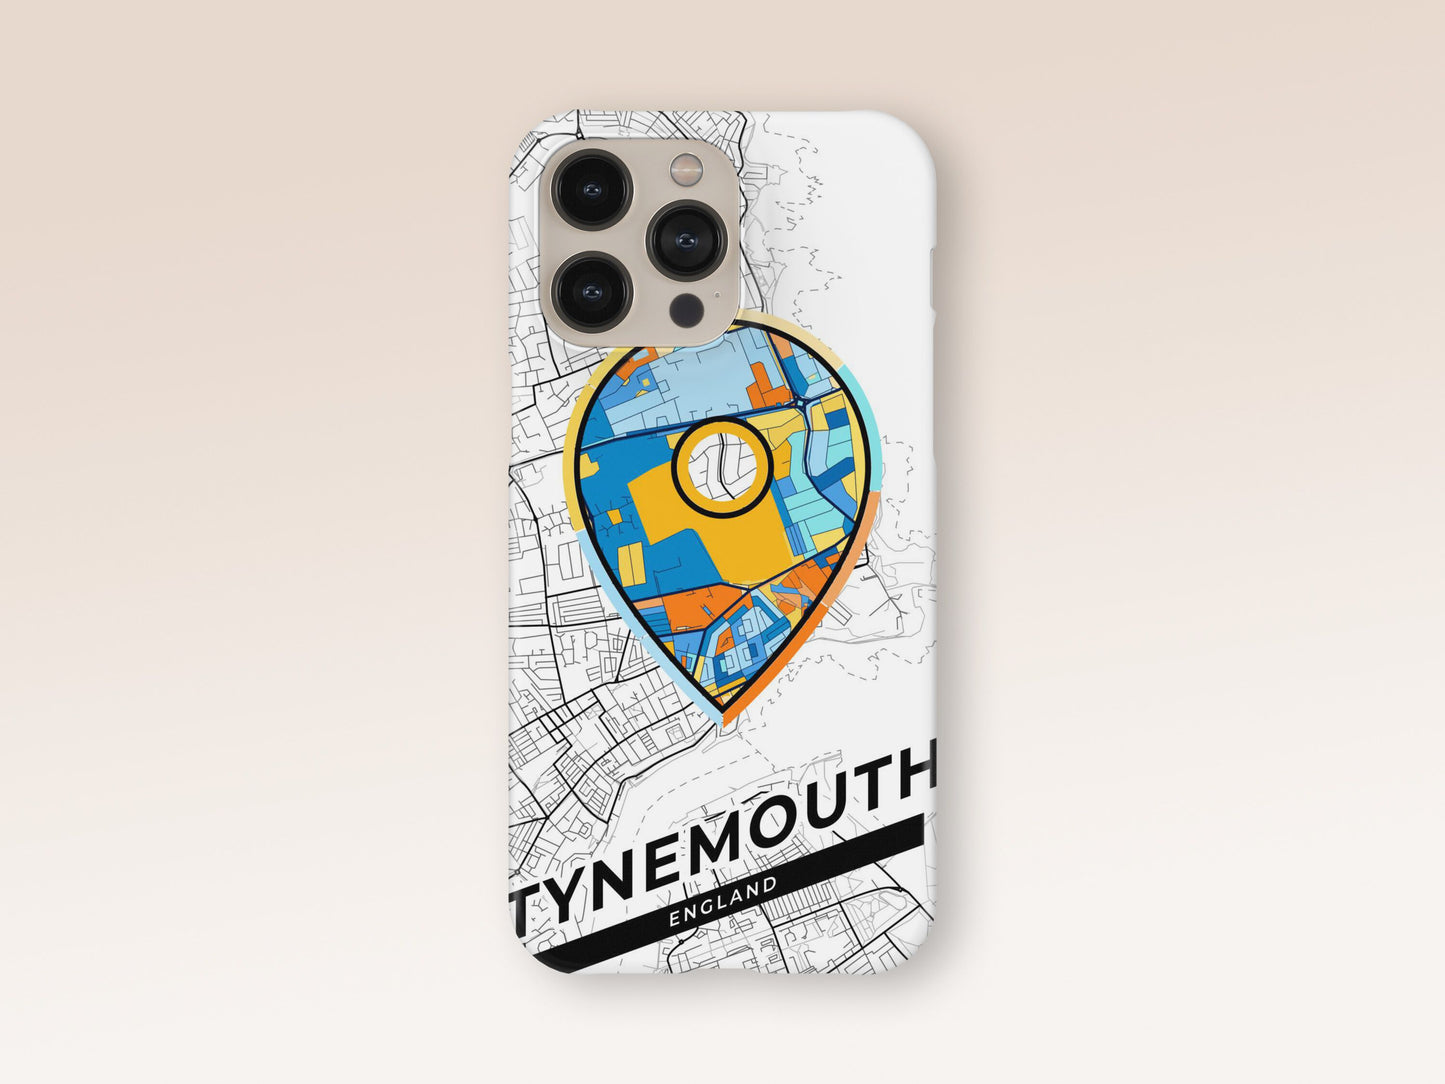 Tynemouth England slim phone case with colorful icon 1